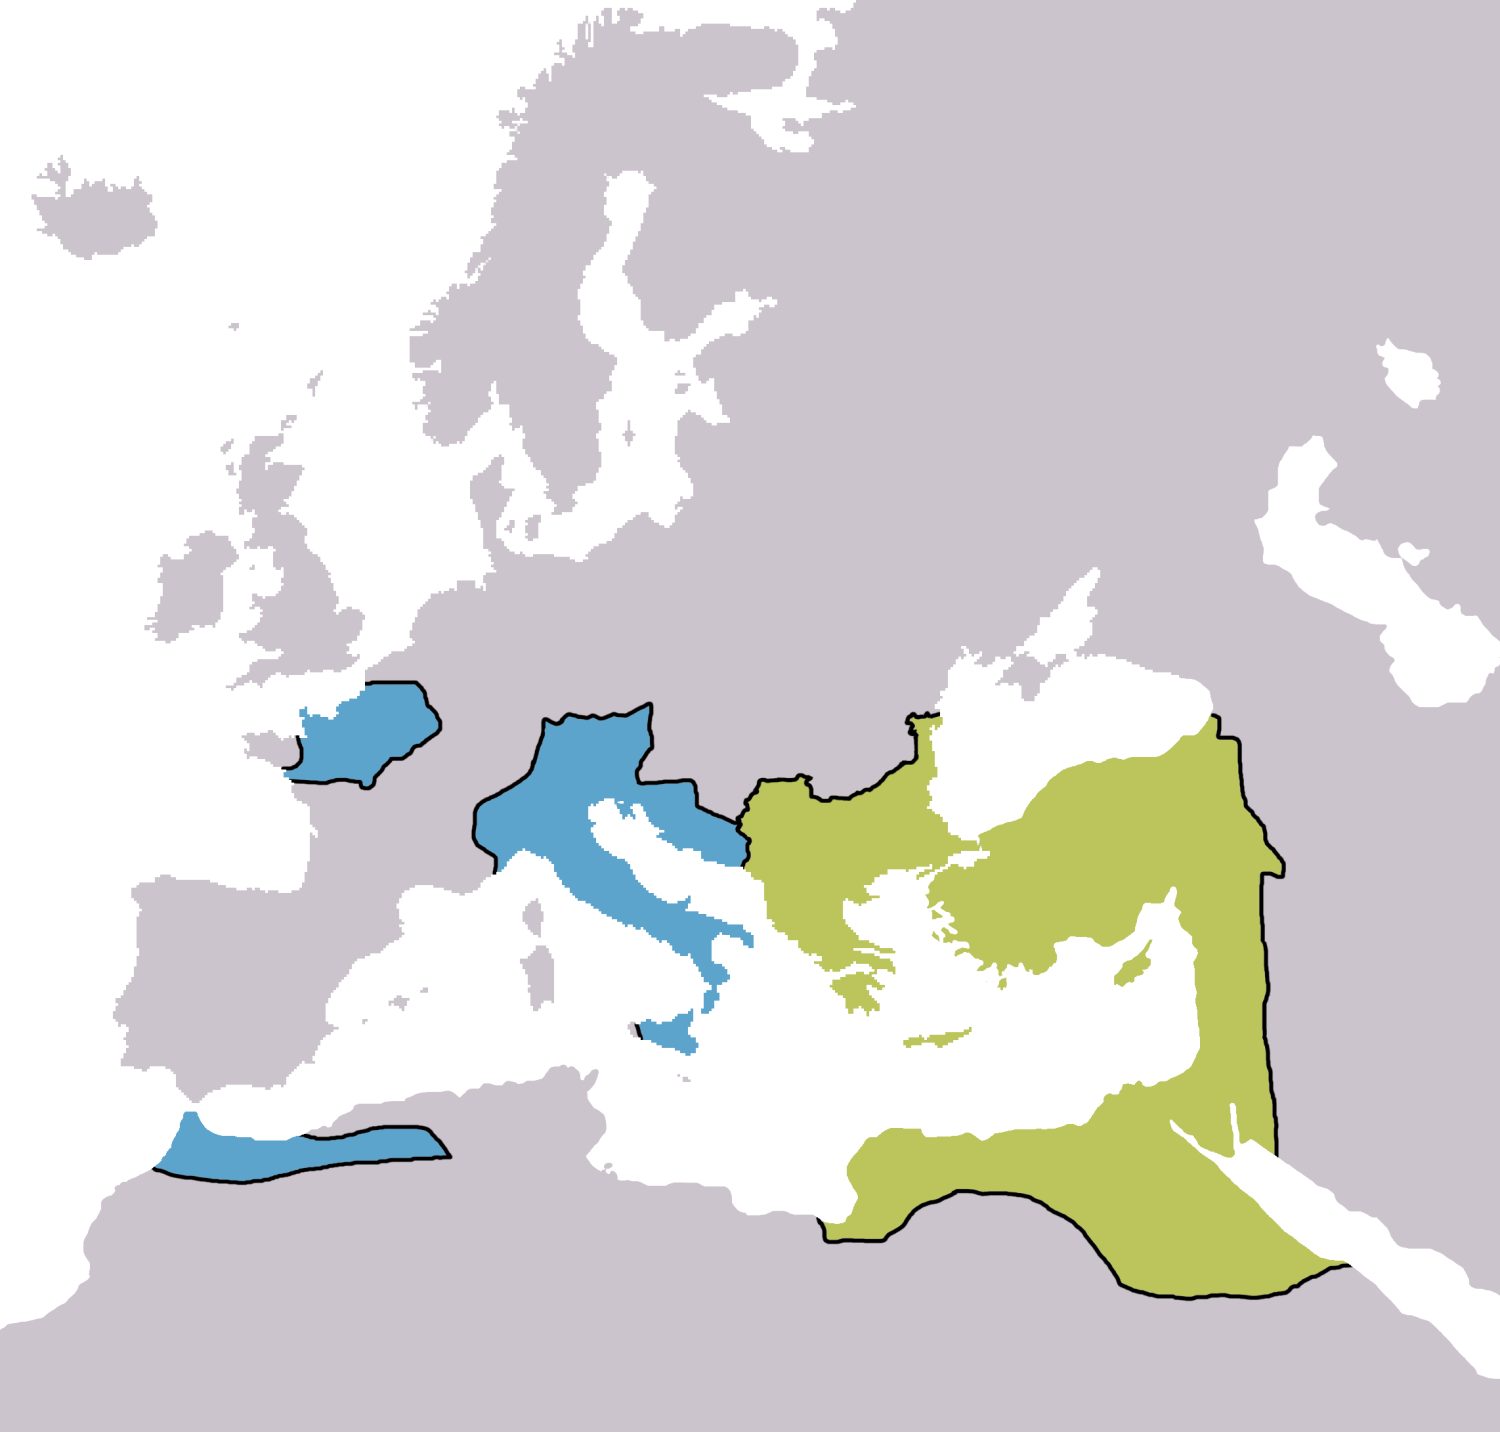 Just How Huge Was The Roman Empire At Its Height?